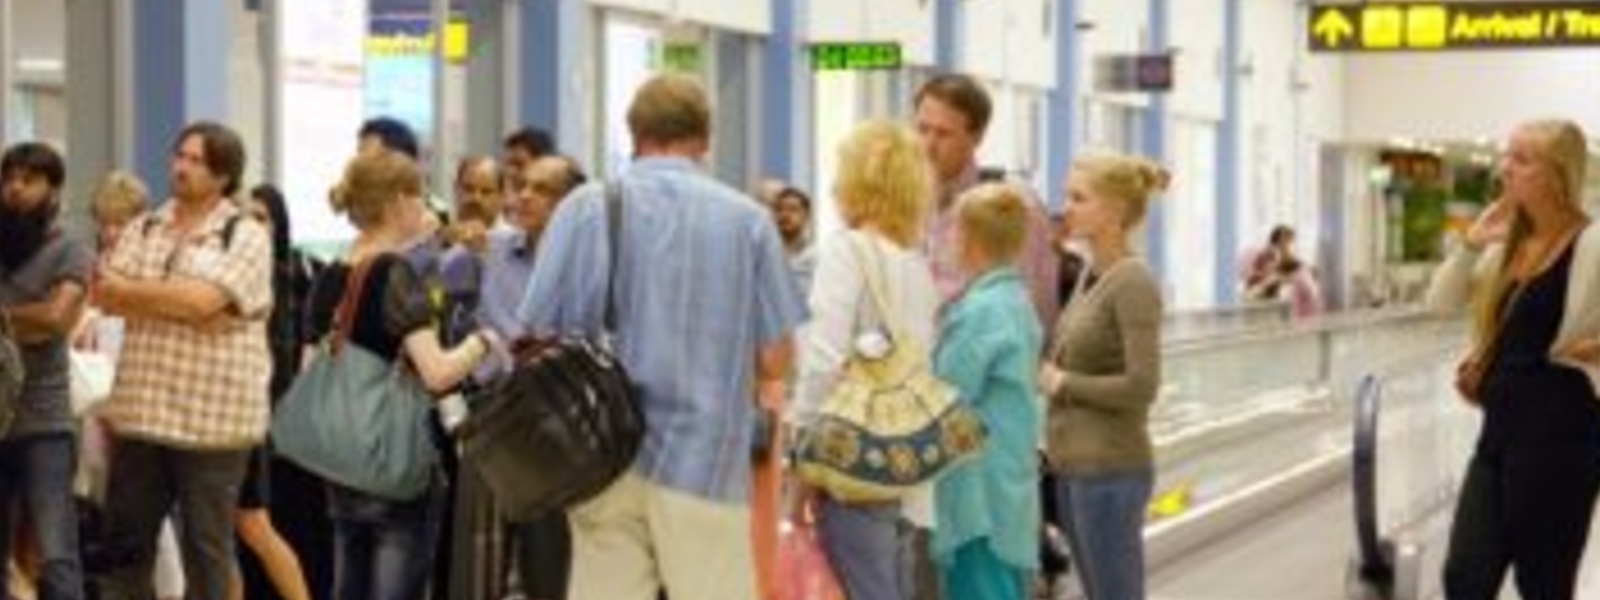 August records highest number of tourist arrivals in 2021